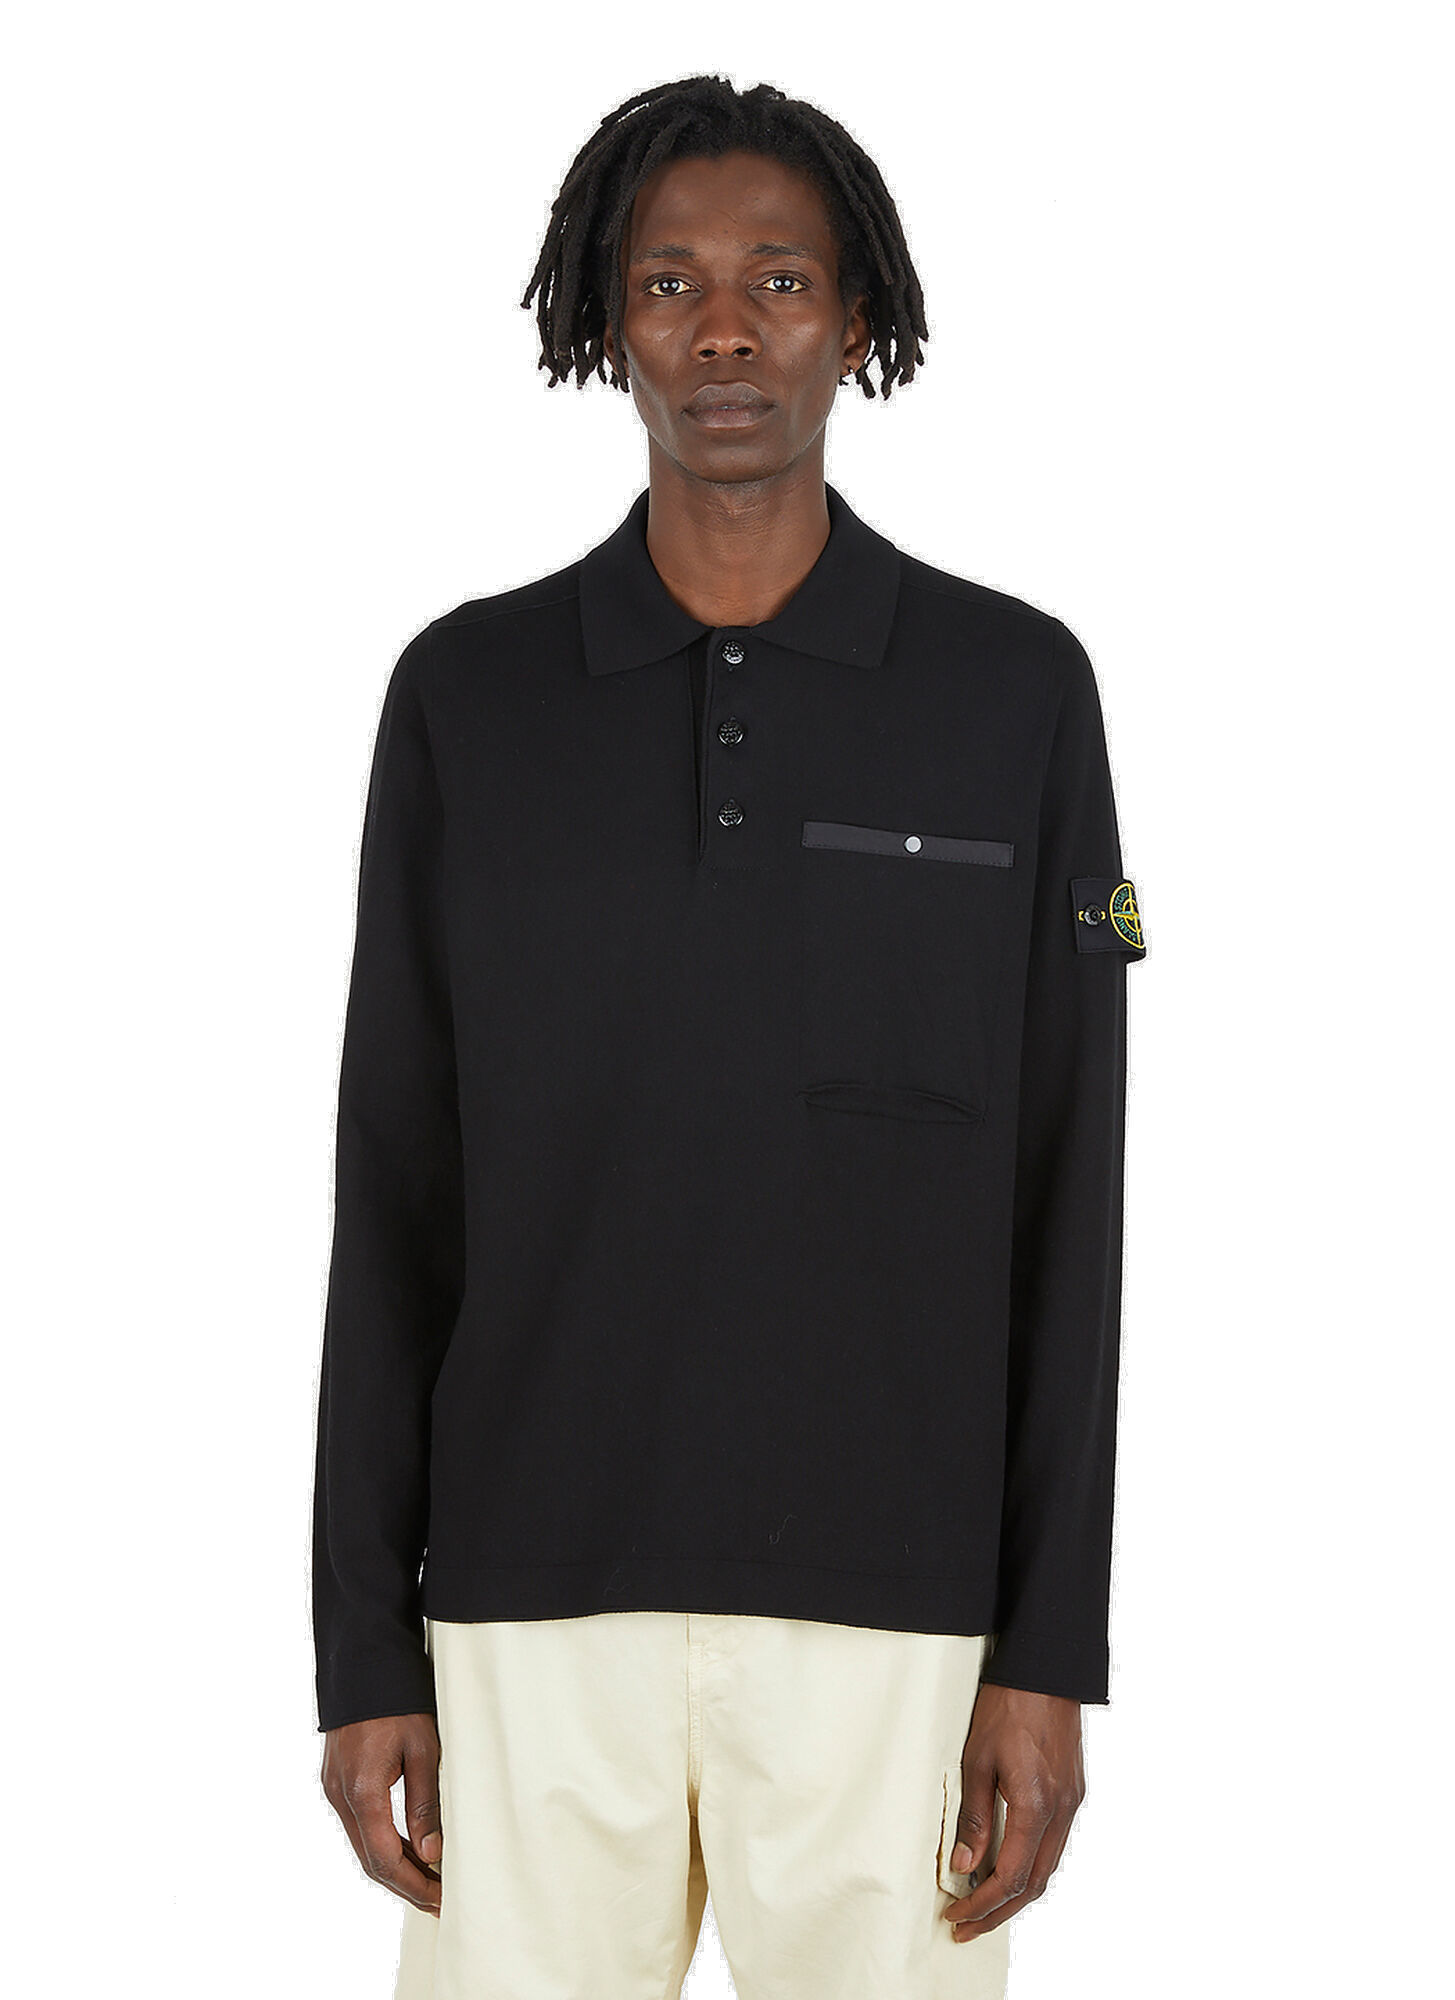 Photo: Compass Patch Polo Shirt in Black